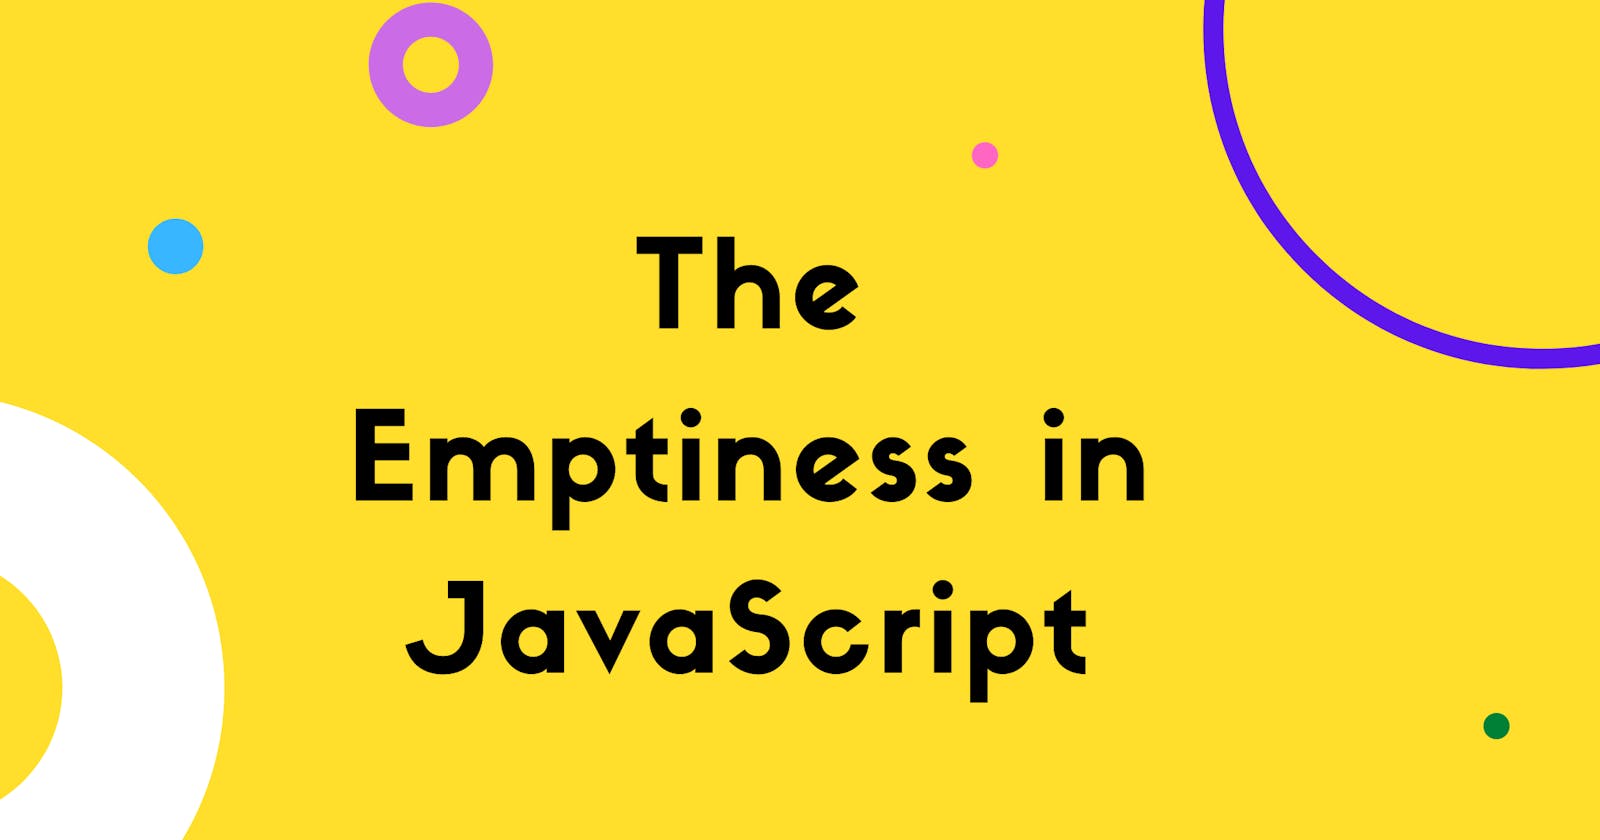 The Emptiness in JavaScript